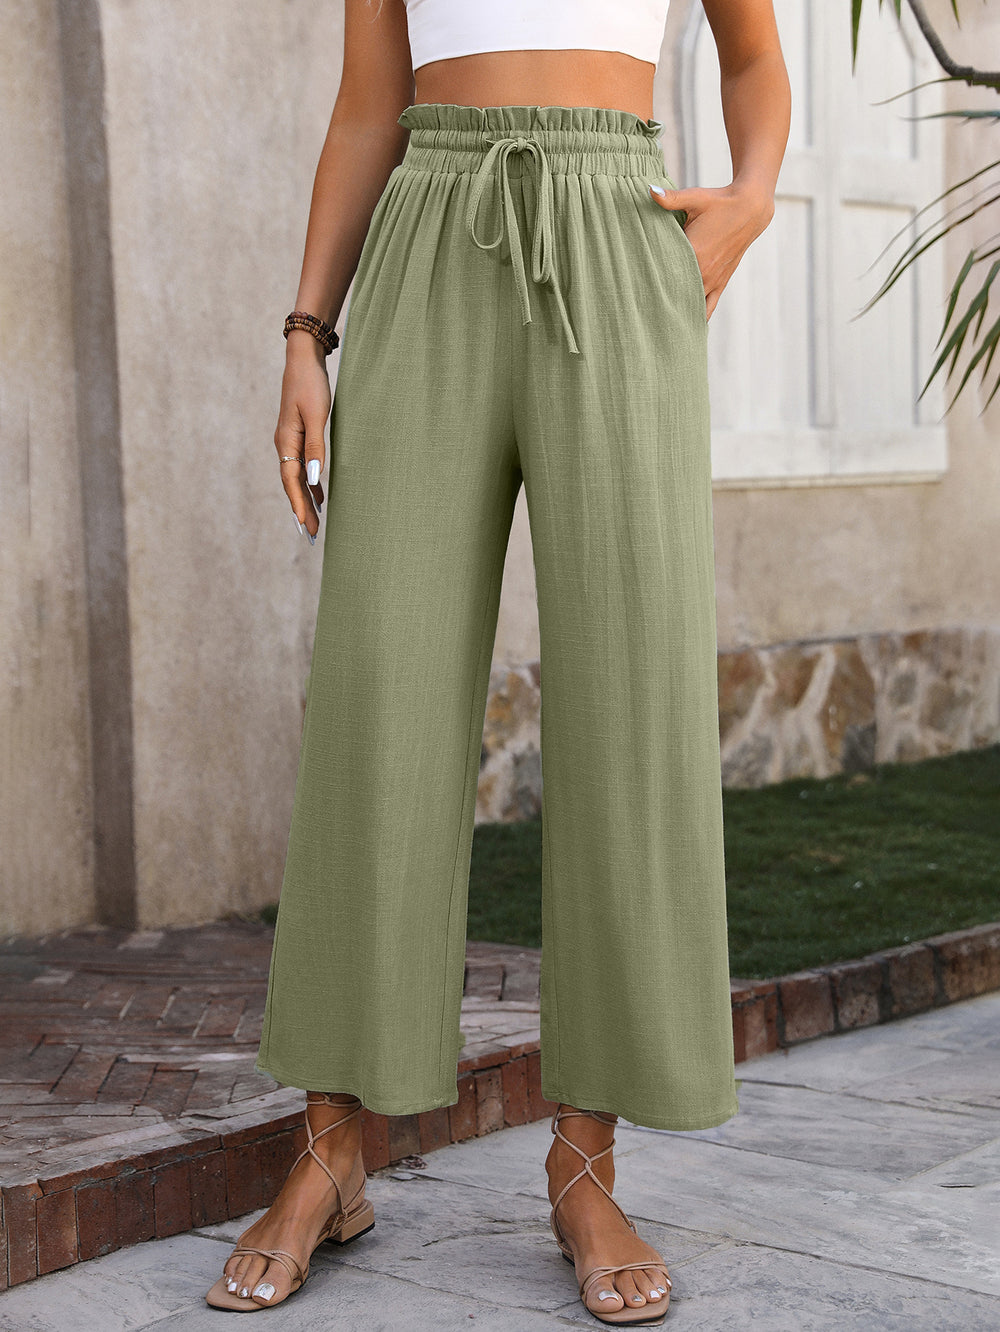 Women Clothing Spring Summer Casual Solid Color Loose Cotton Linen High Waist Wide Leg Trousers Women